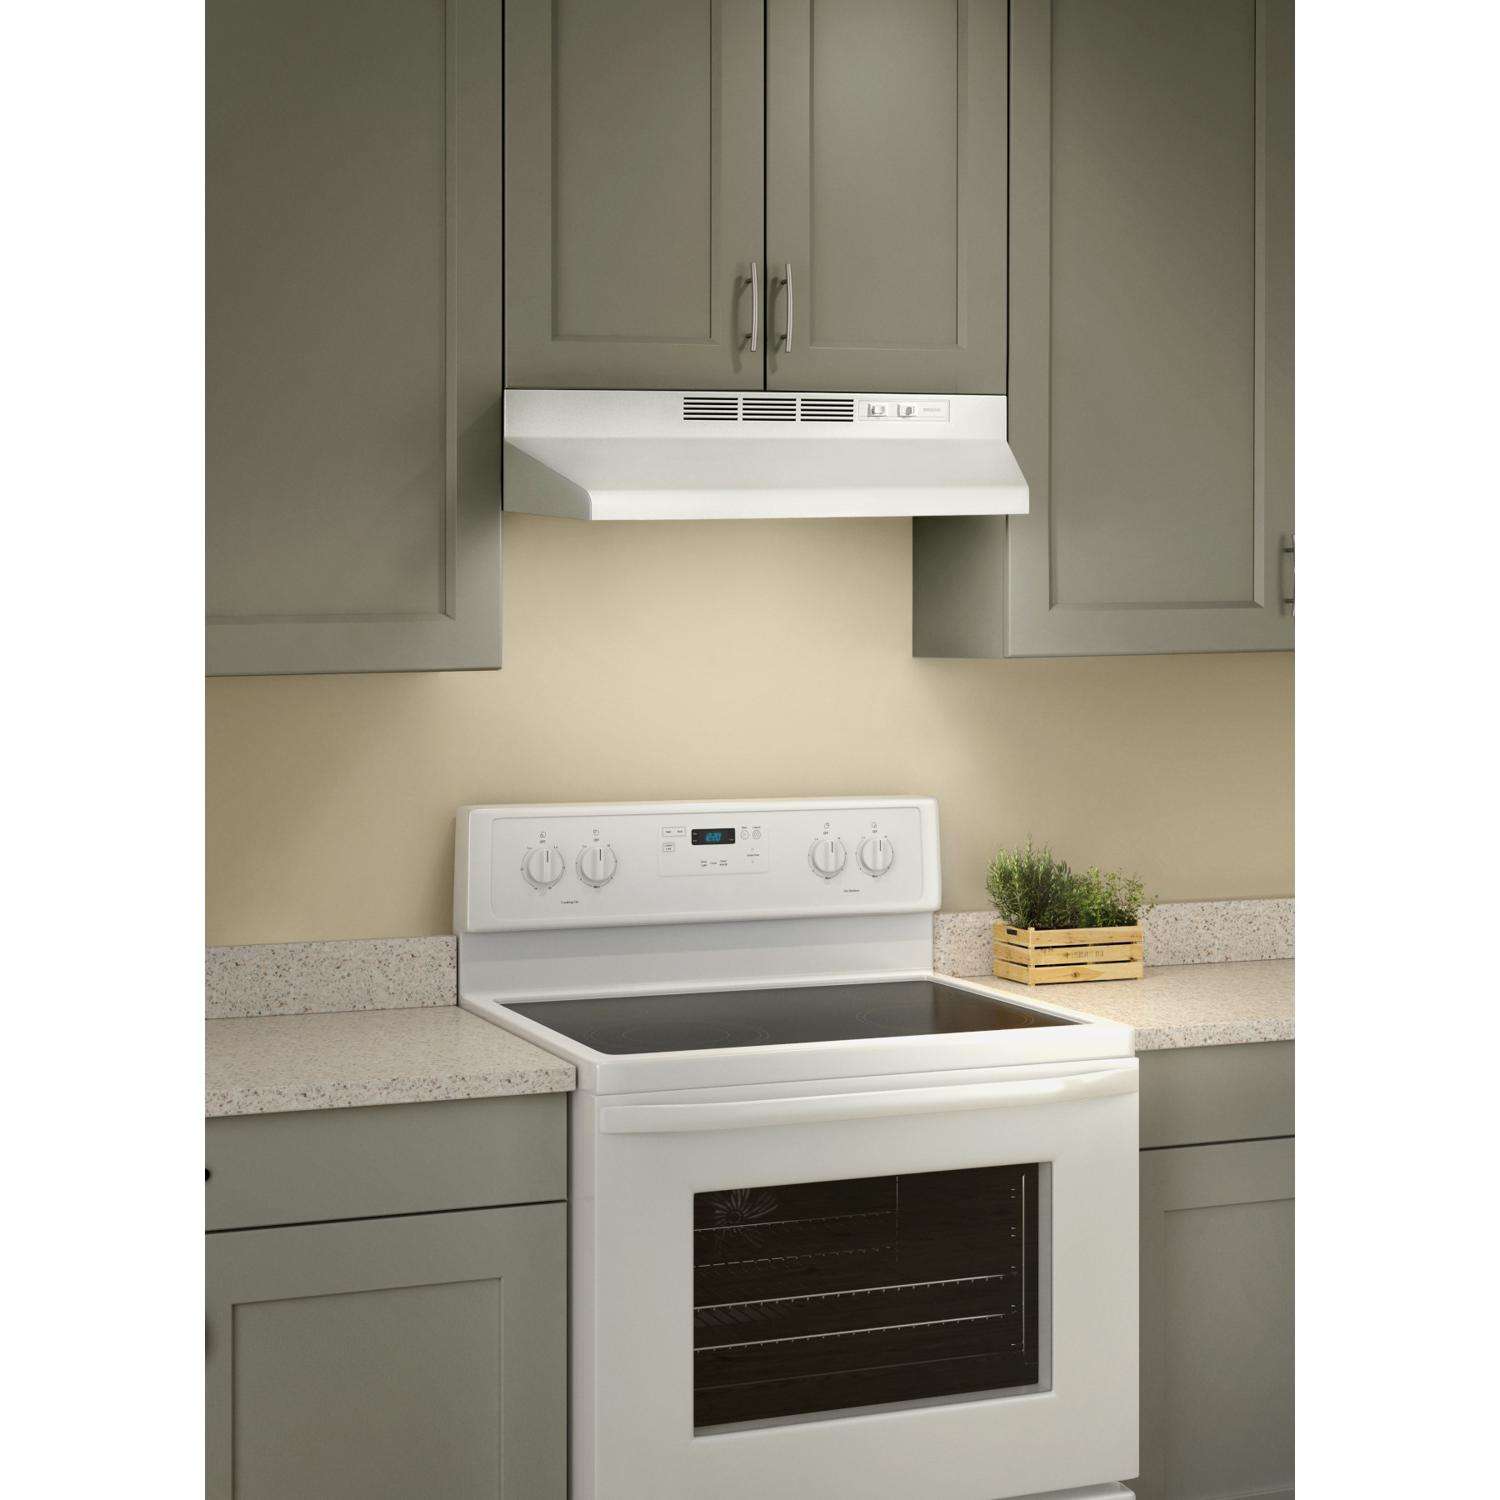 Broan-NuTone AR1 Series 30 in. 270 Max Blower CFM 4-Way Convertible Under-Cabinet  Range Hood with Light in Stainless Steel AR130SS - The Home Depot